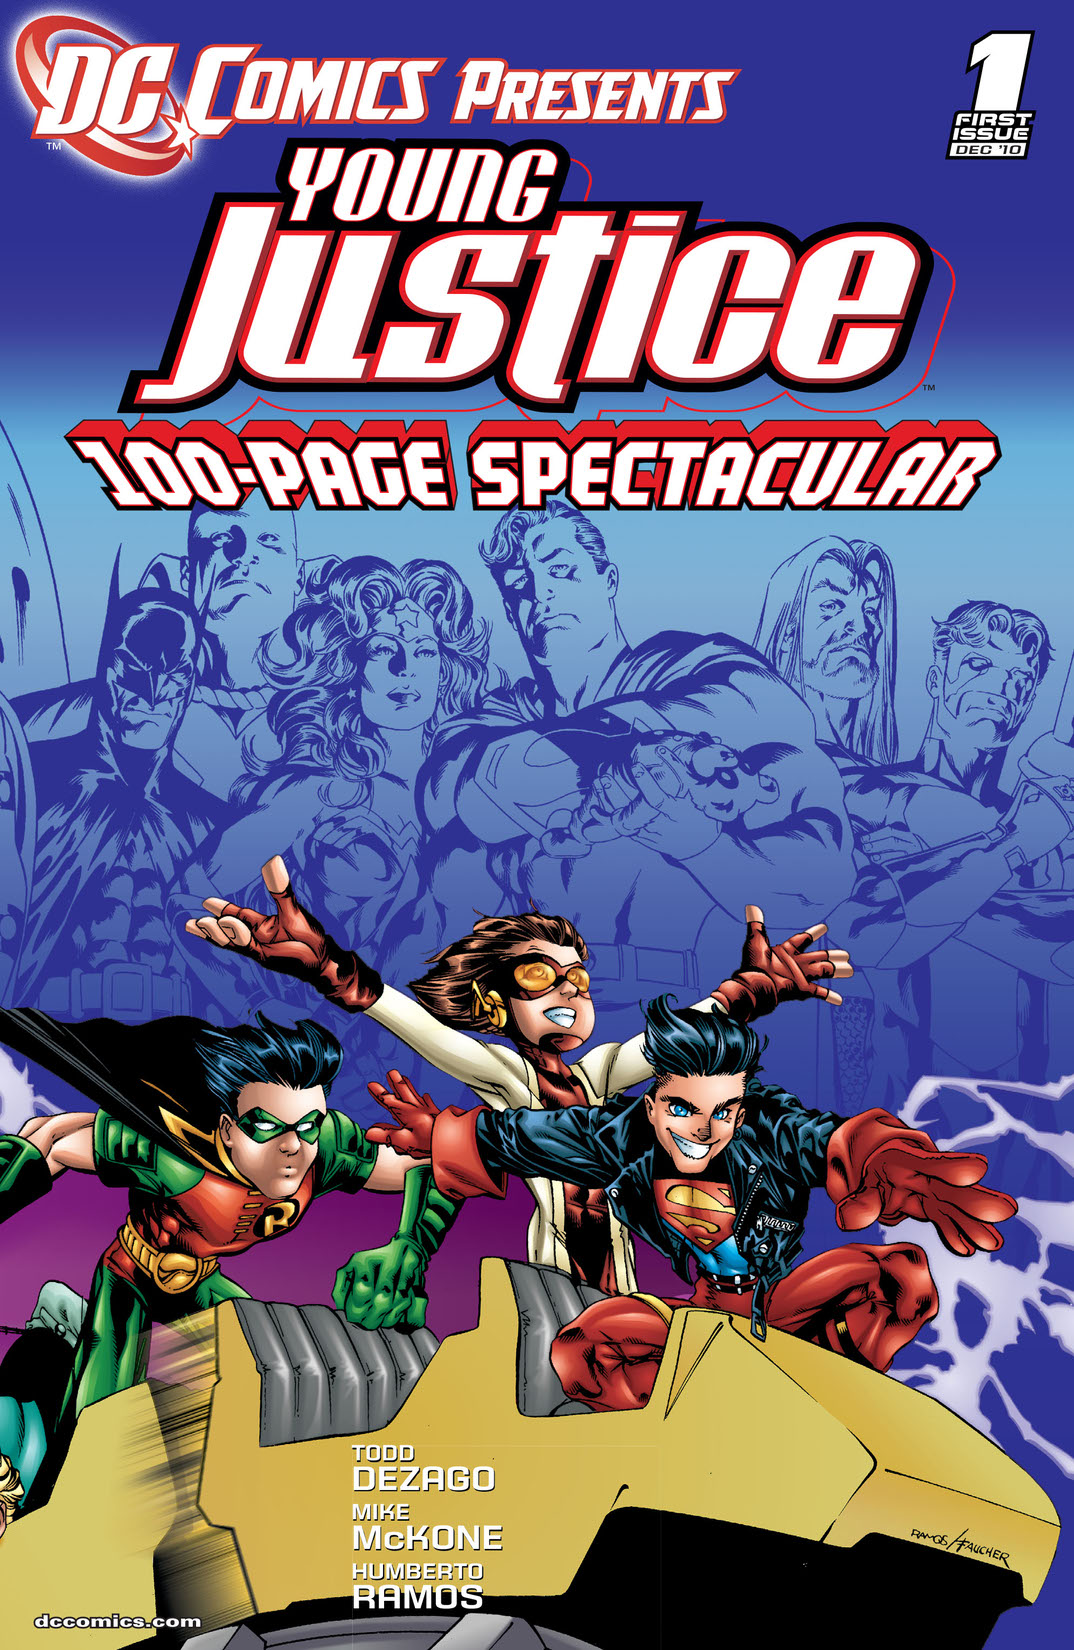 DC Comics Presents: Young Justice (2010-) #1 preview images